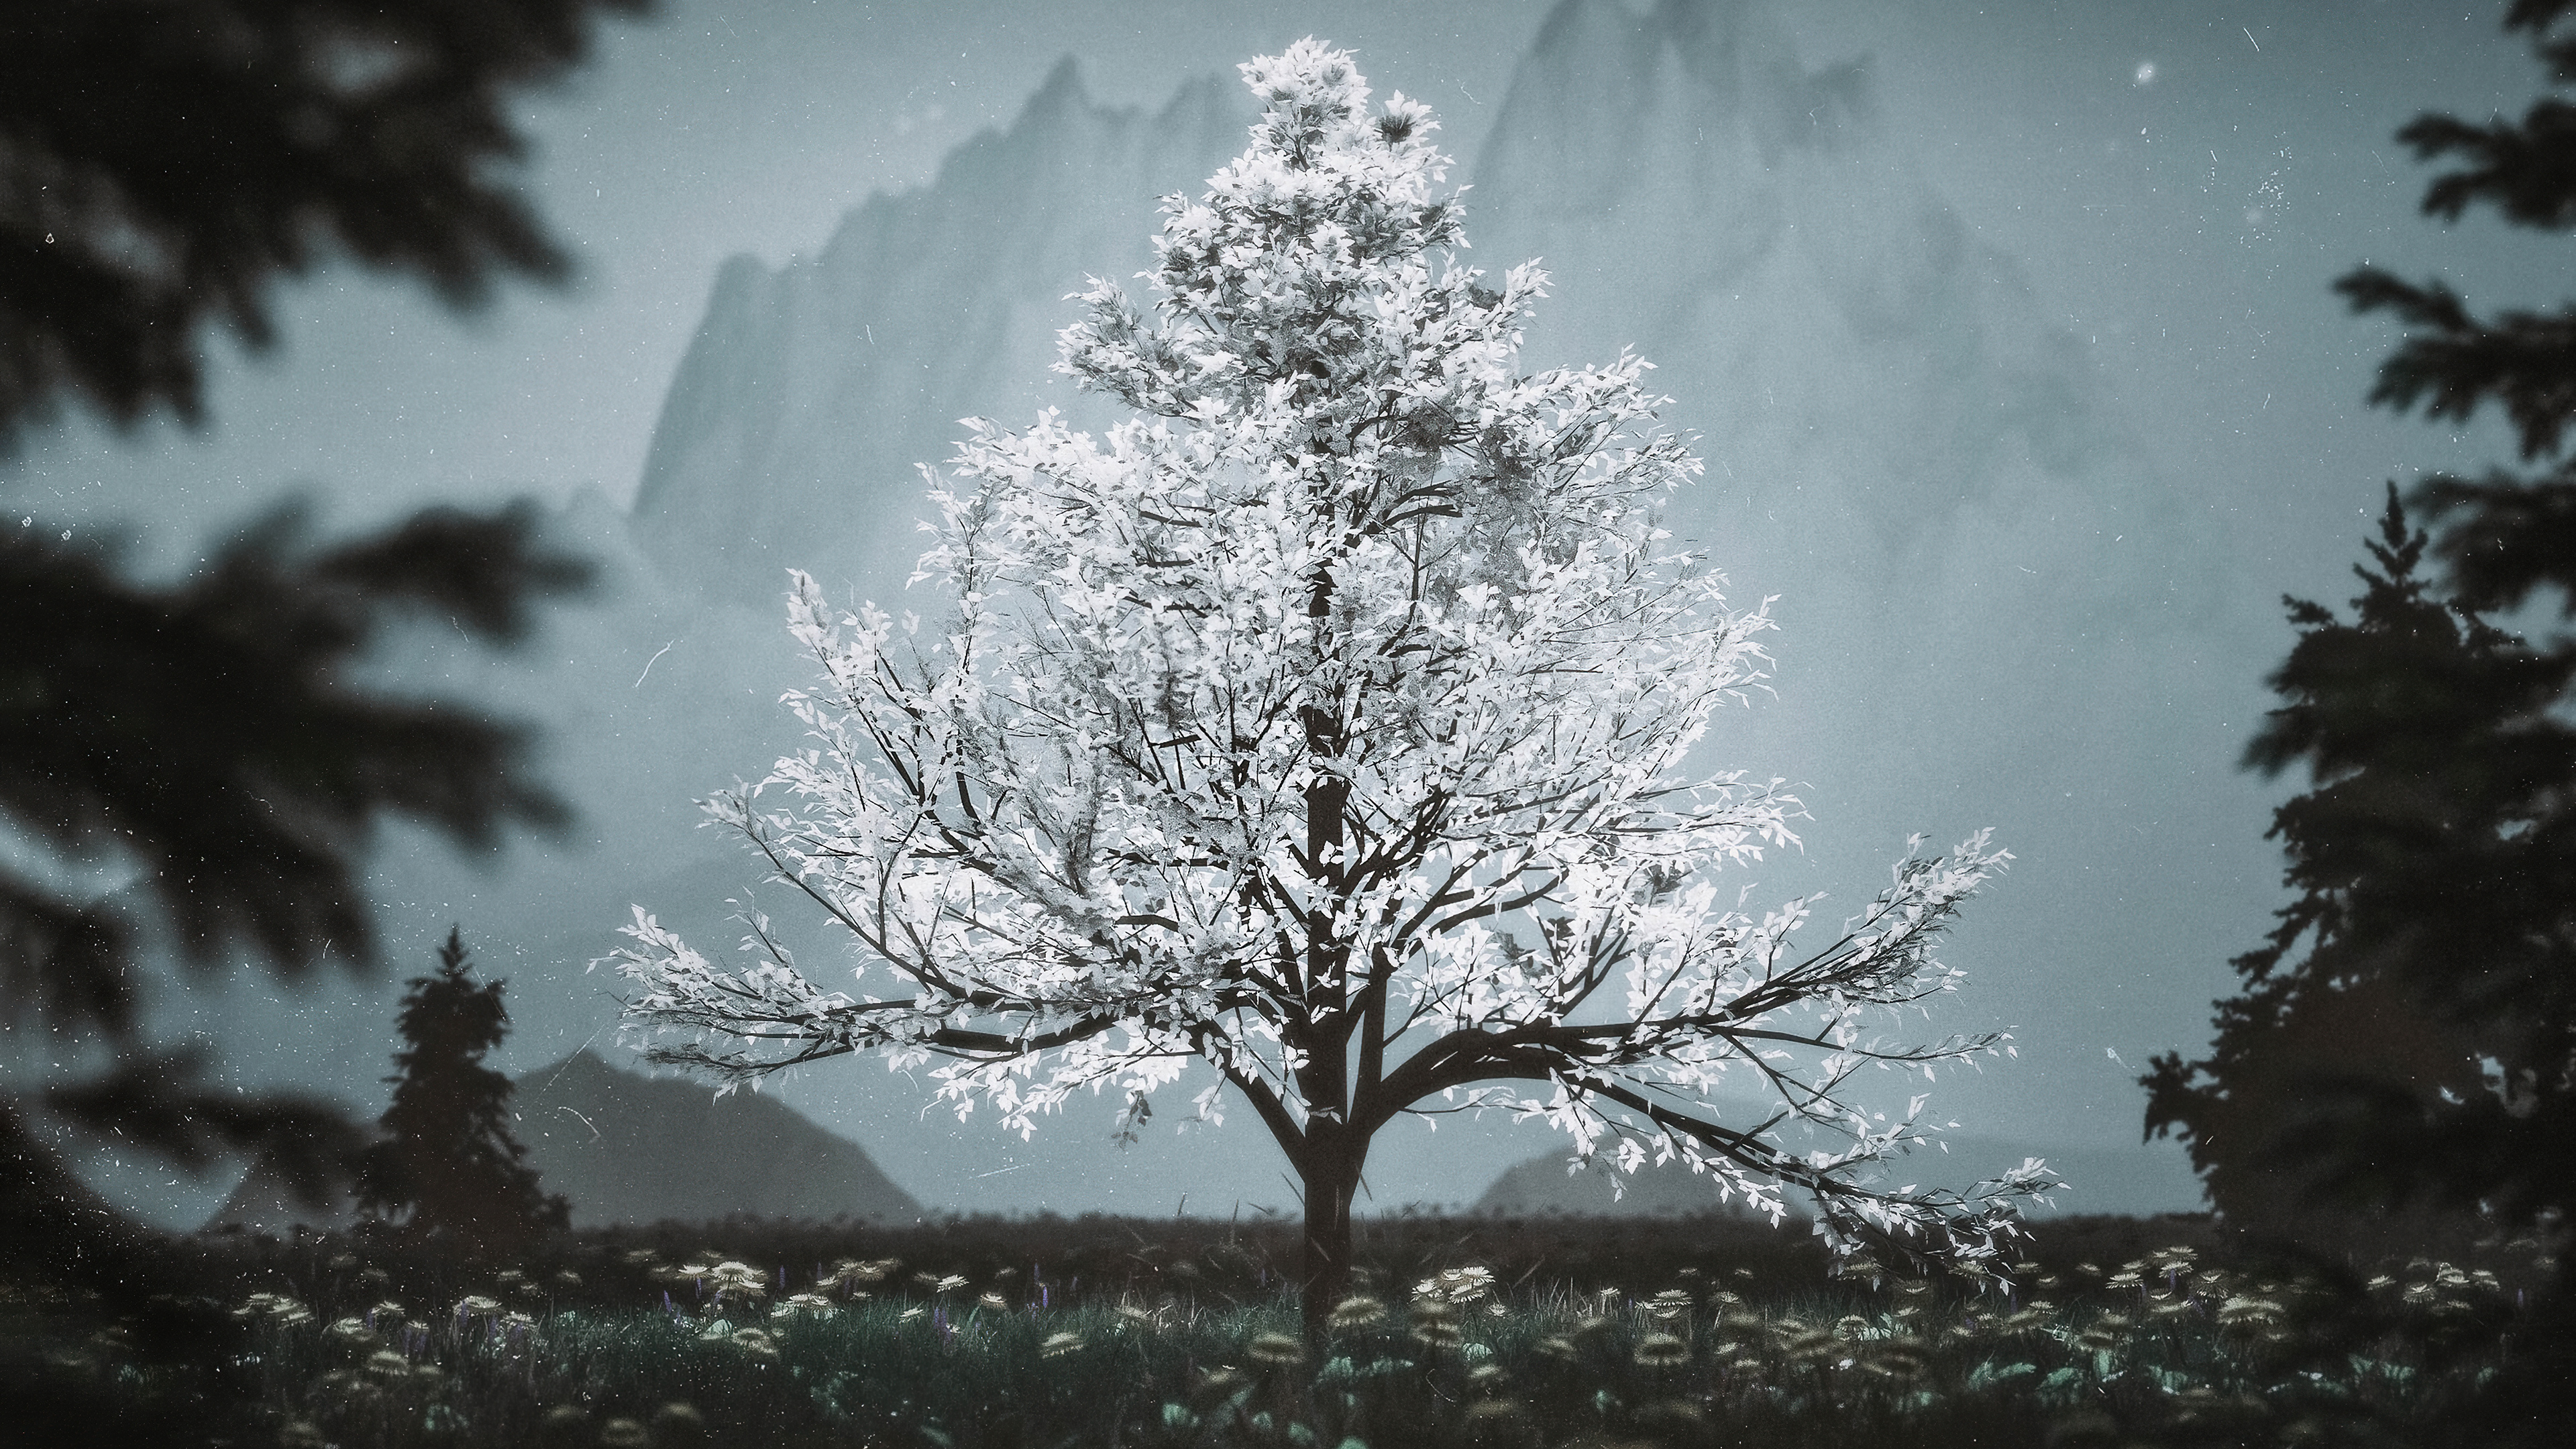 Rendering of a flowering tree with white flowers on it